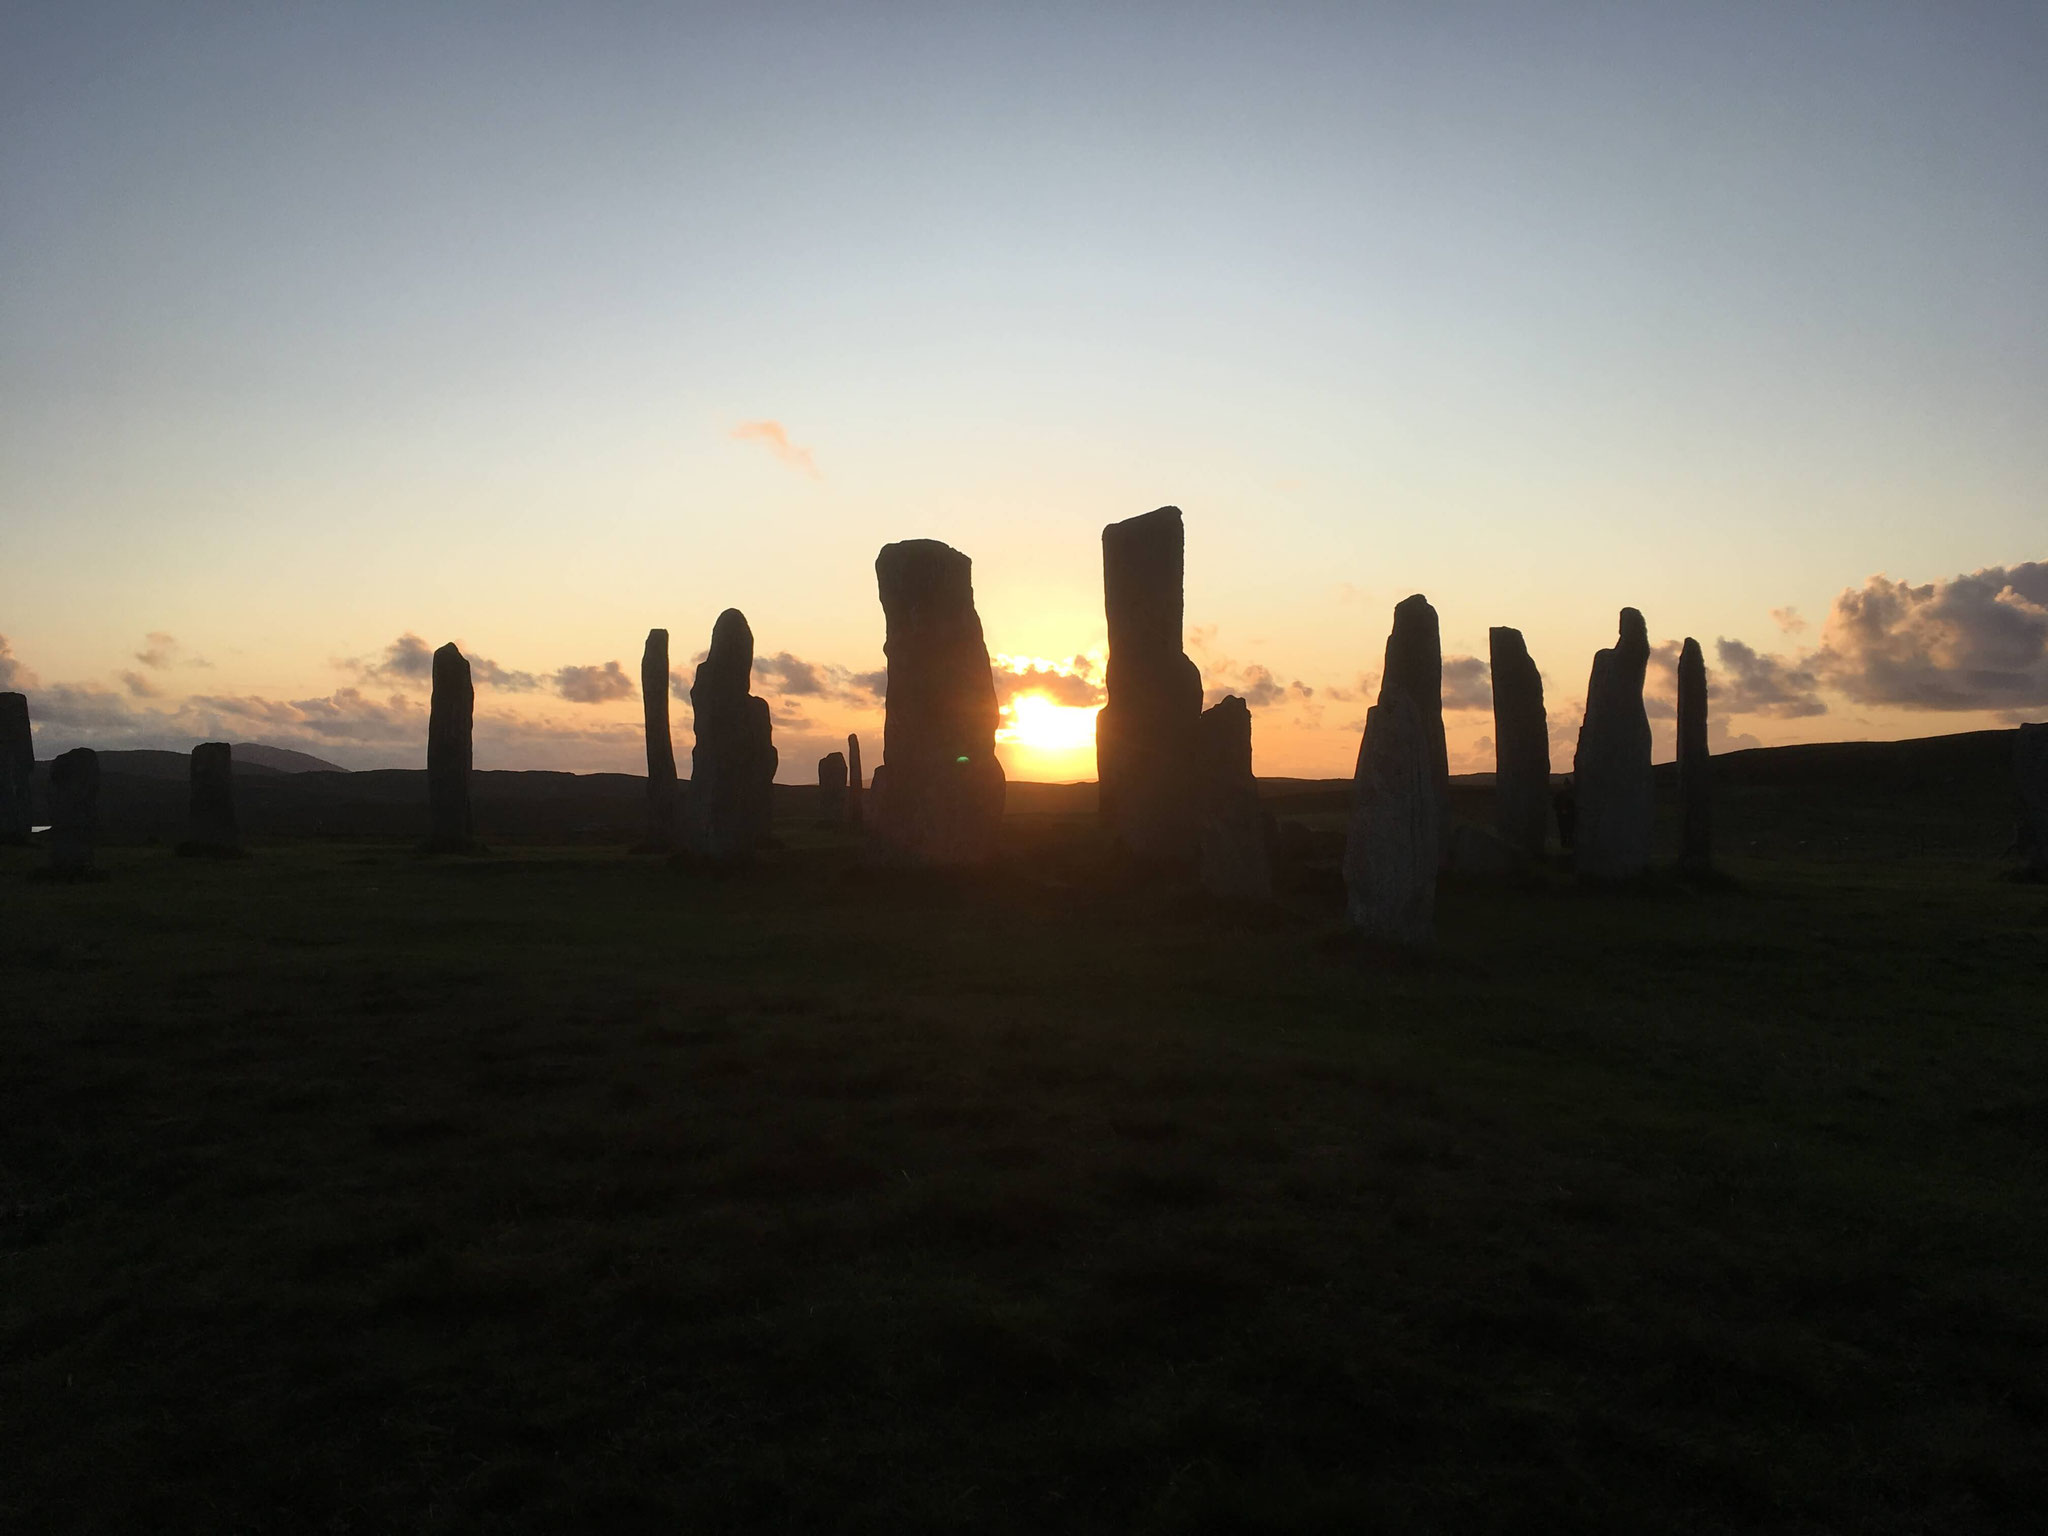 Sunset at the Standing Stones of Callanish